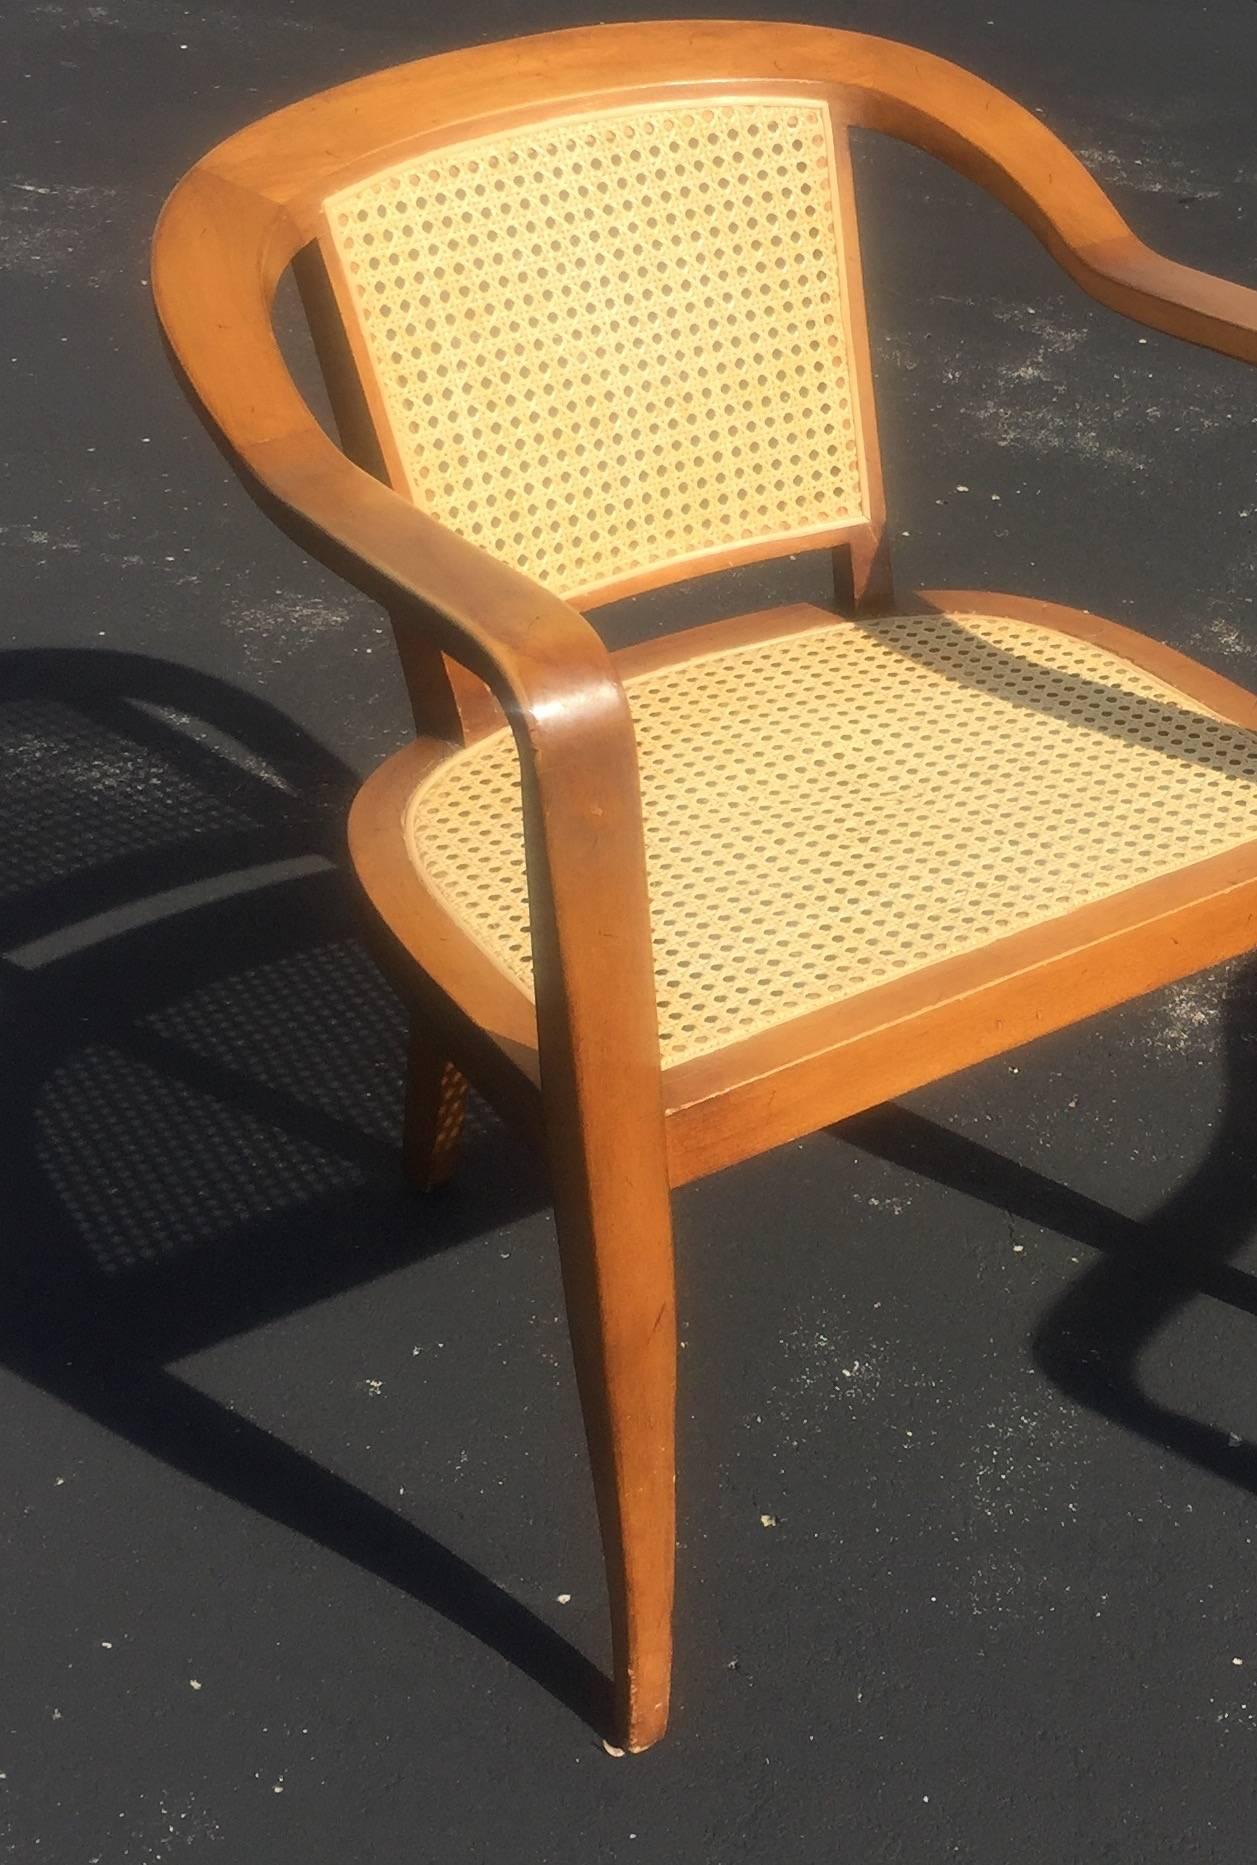 Pair of 1950s Mid-Century Modern armchairs, cane inset seats and backs on walnut frames with splayed legs. In the style of Edward Wormley for Dunbar.